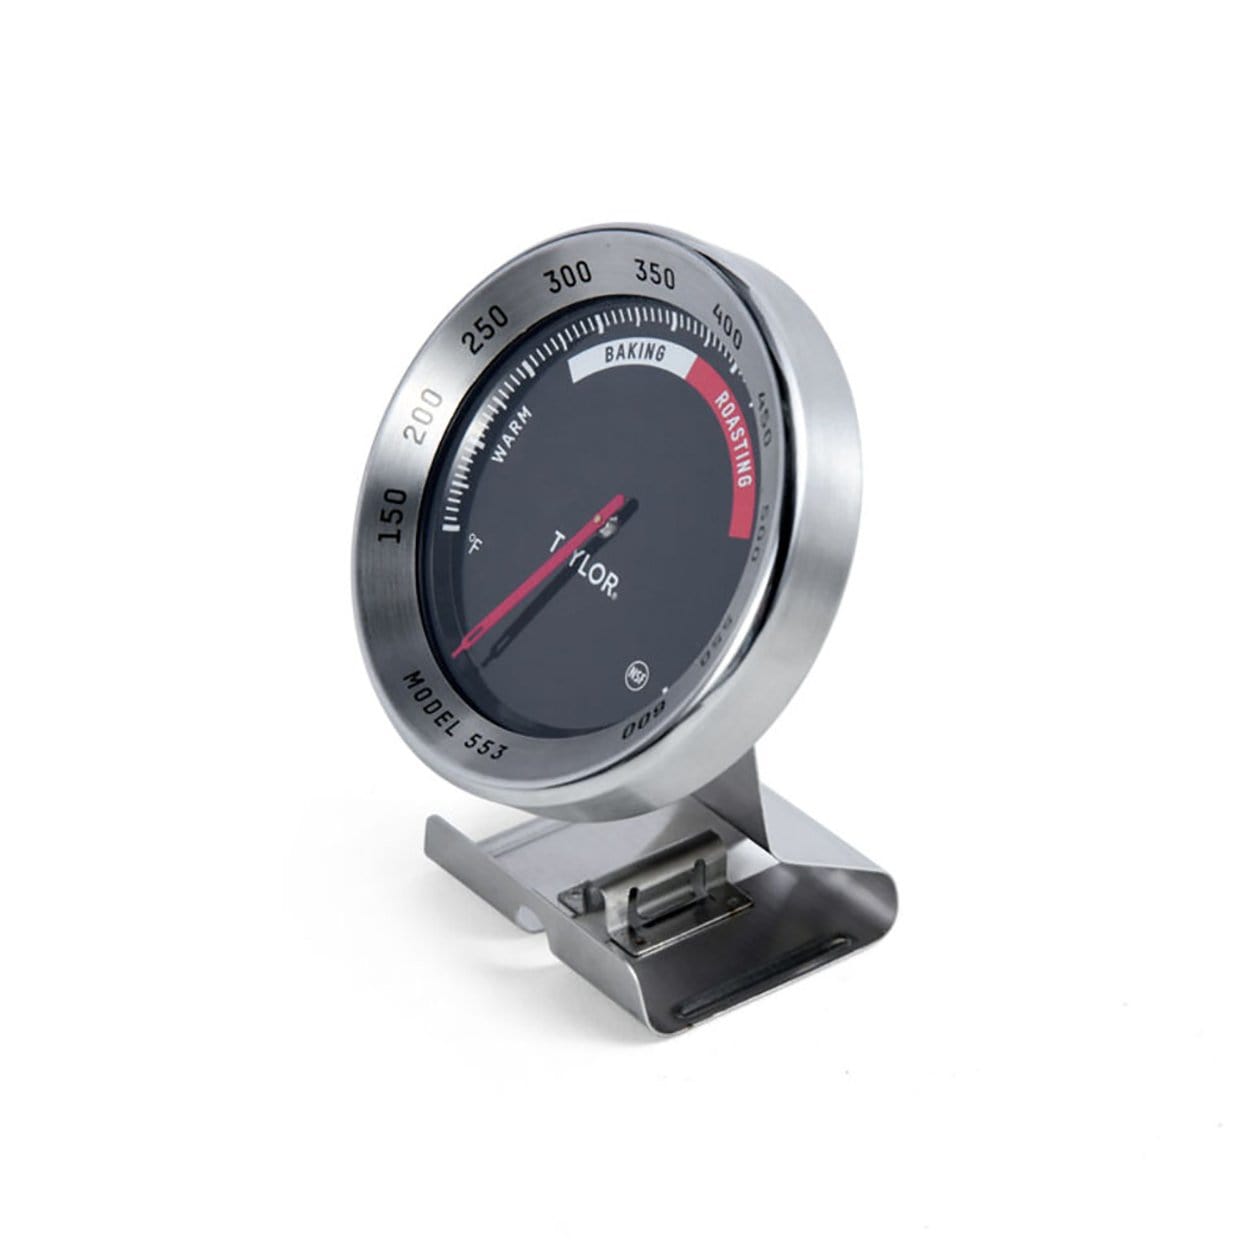 PRO Oven Thermometer